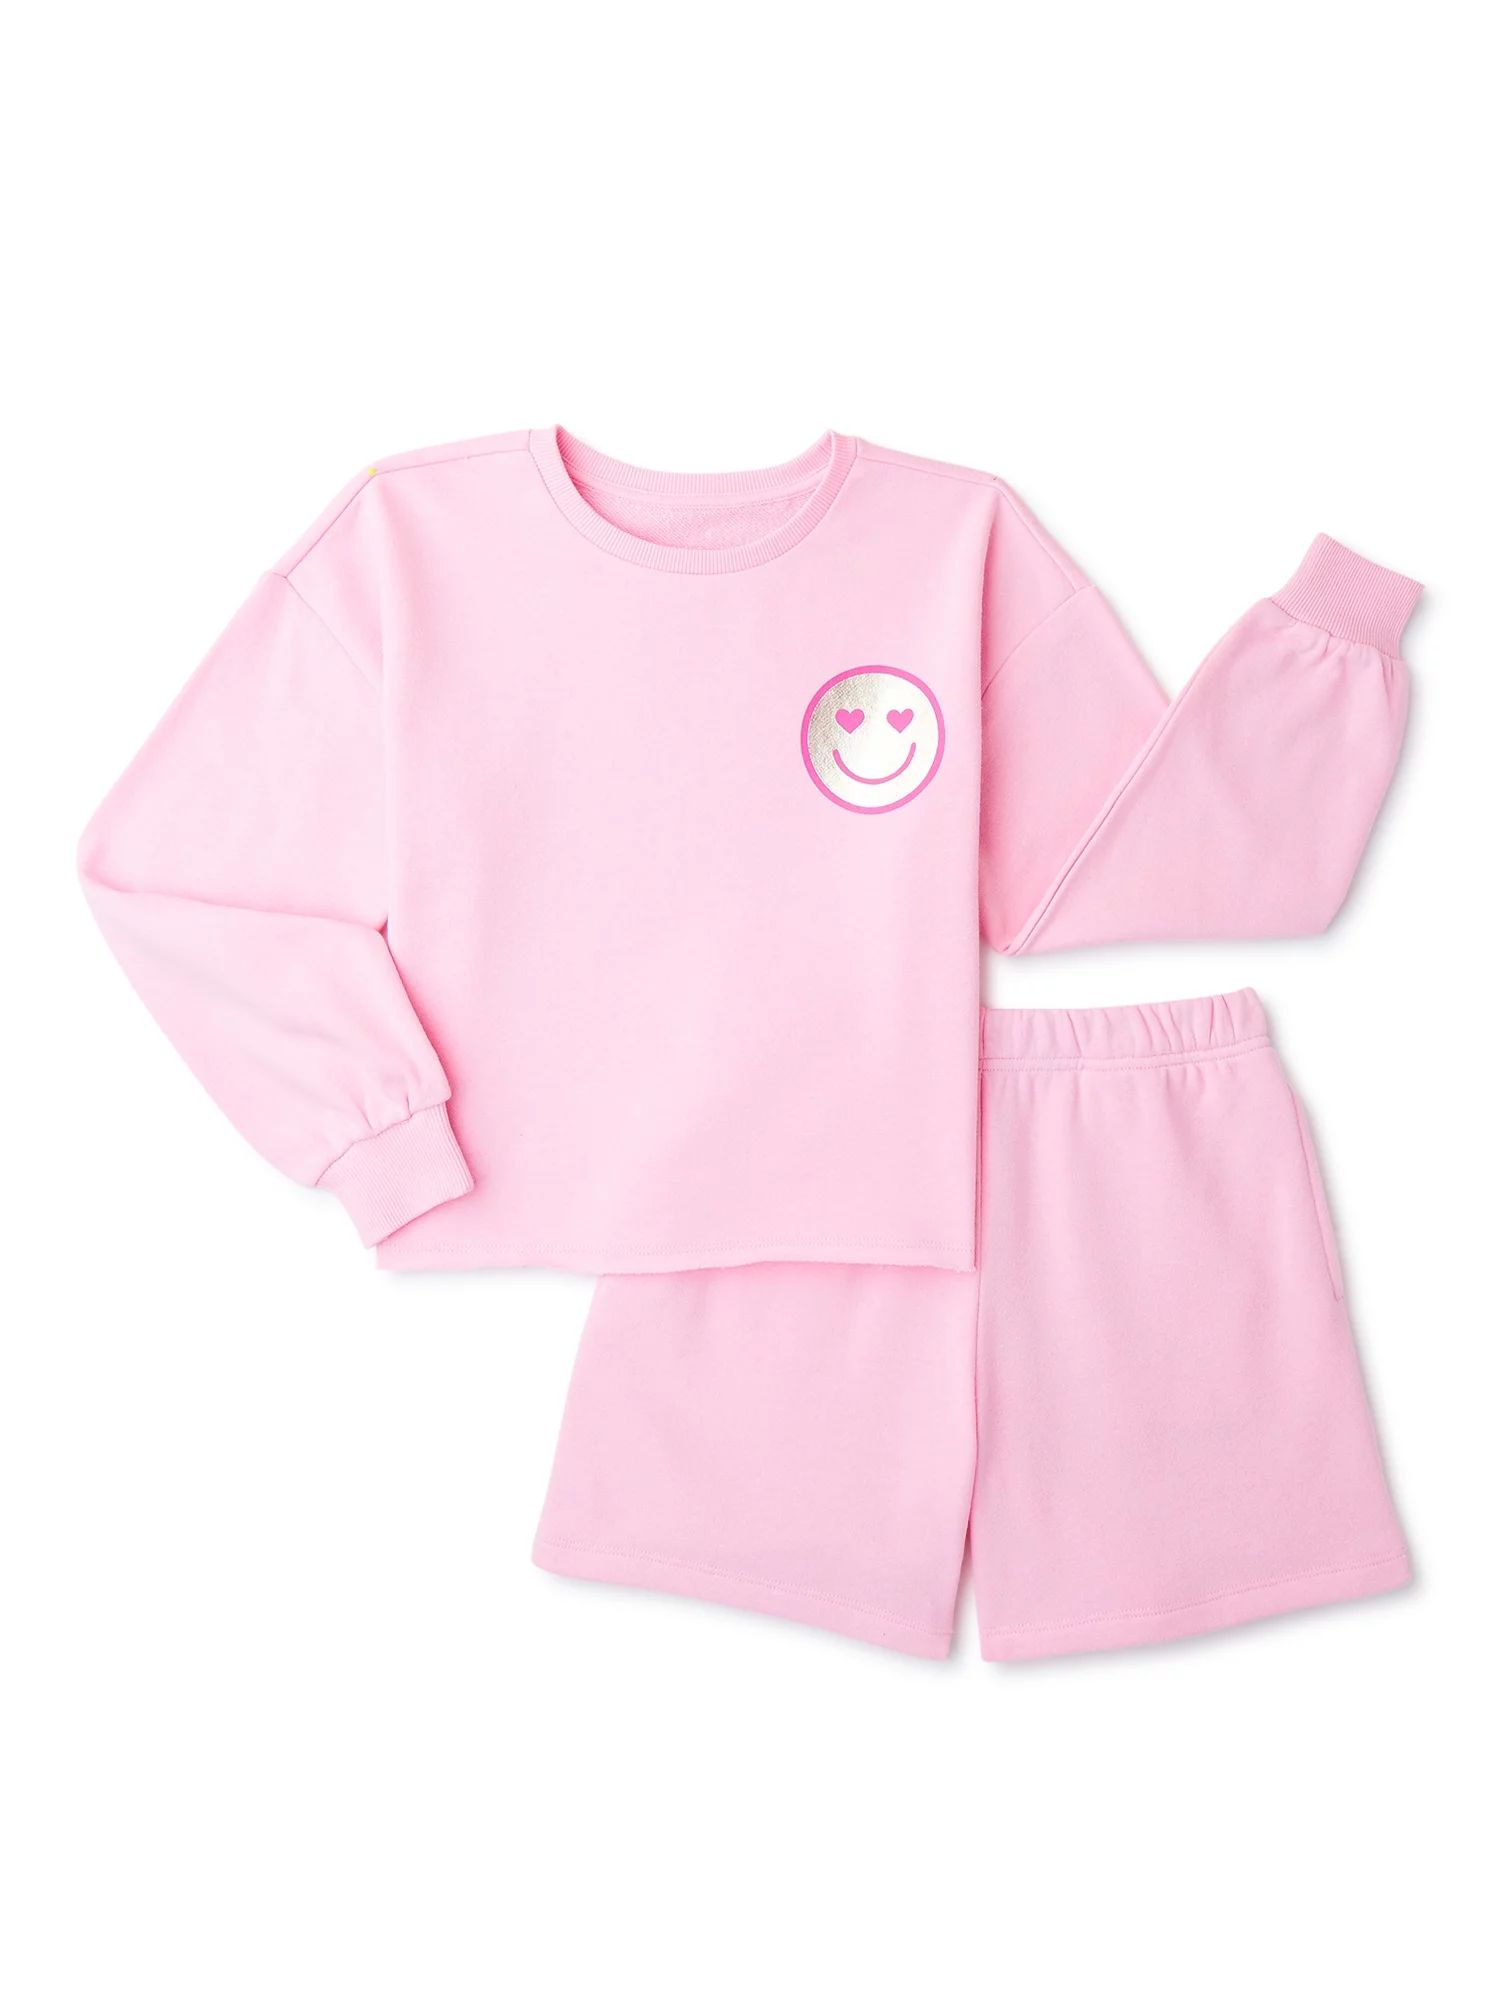 We Wear Cute Girls’ Sweatshirt and Comfy Shorts Outfit Set, 2-Piece, Sizes 4-16 | Walmart (US)